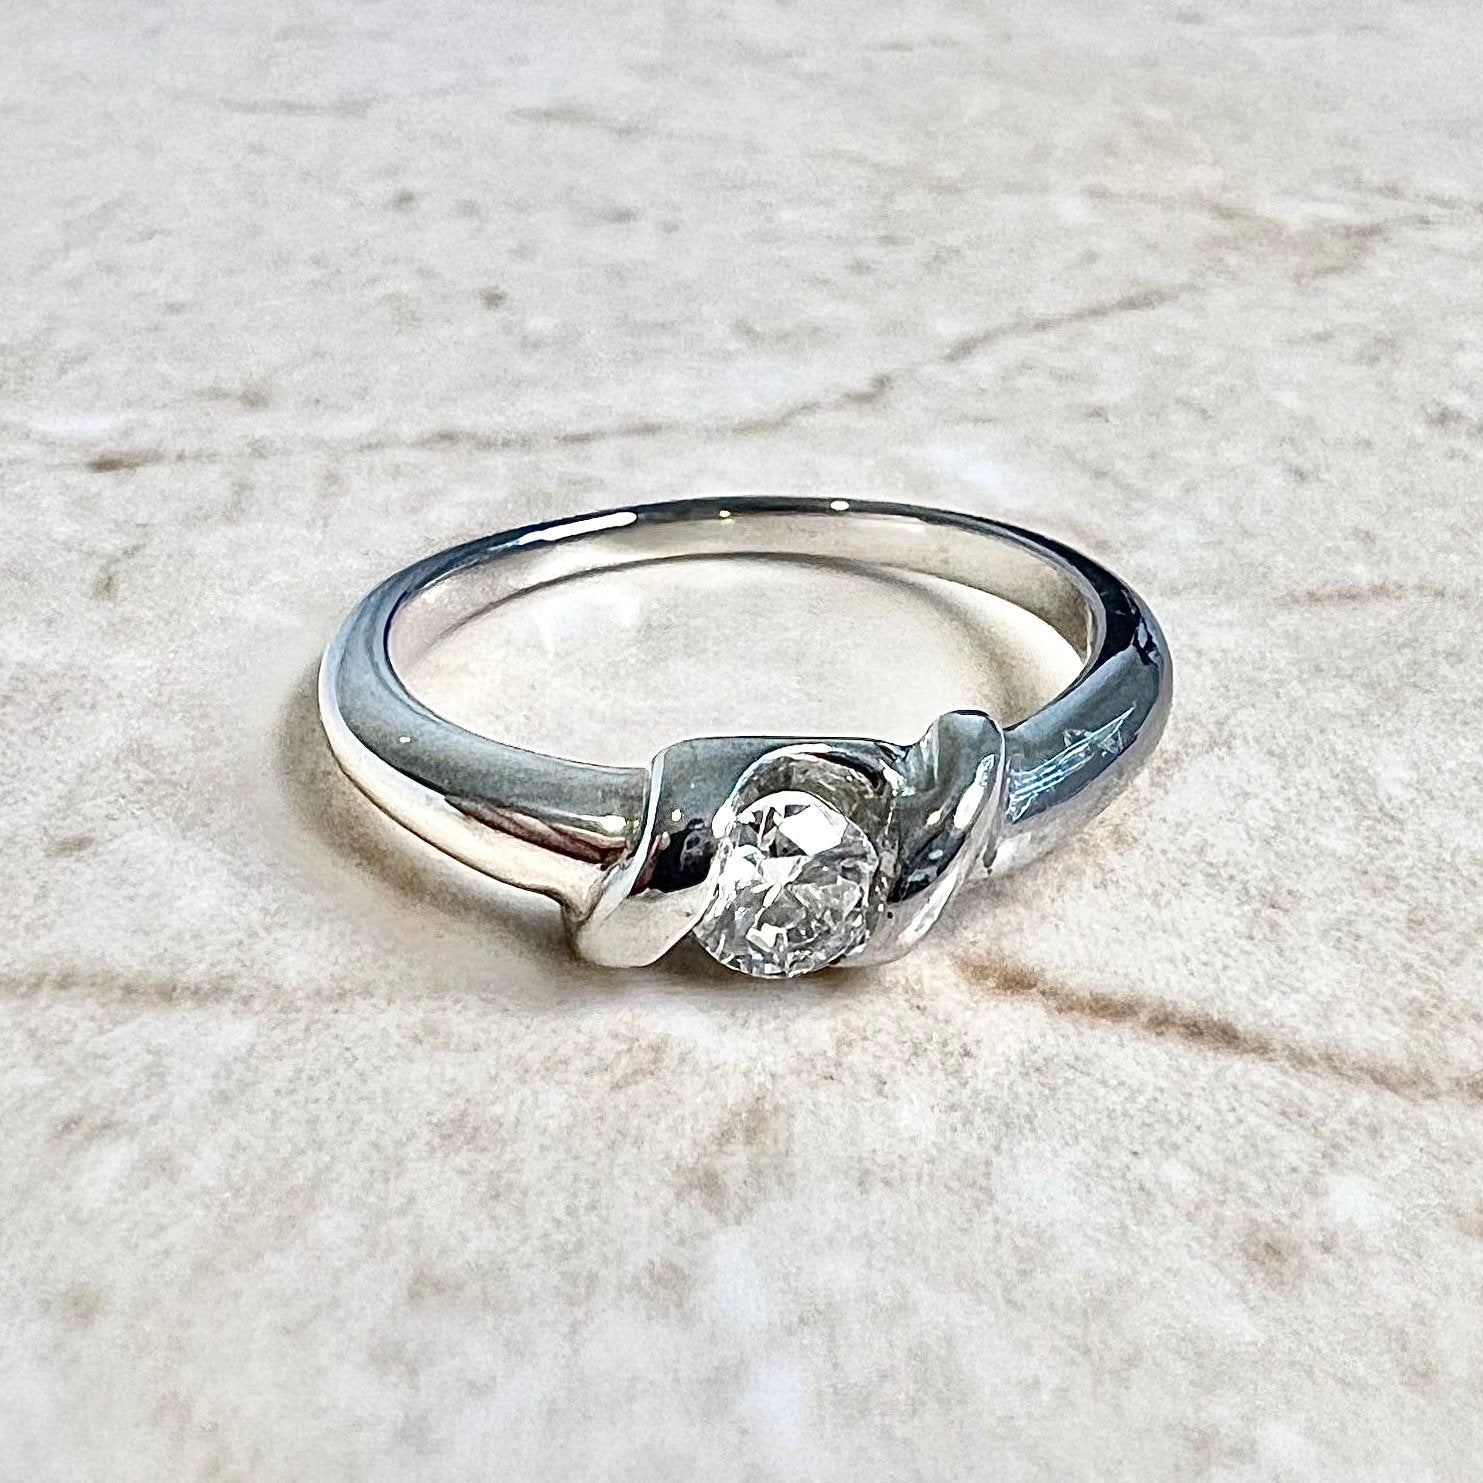 Vintage 14K Diamond Engagement Ring 0.25 CT - White Gold Diamond Solitaire Ring - Promise Ring - Diamond Wedding Ring - Best Gifts For Her